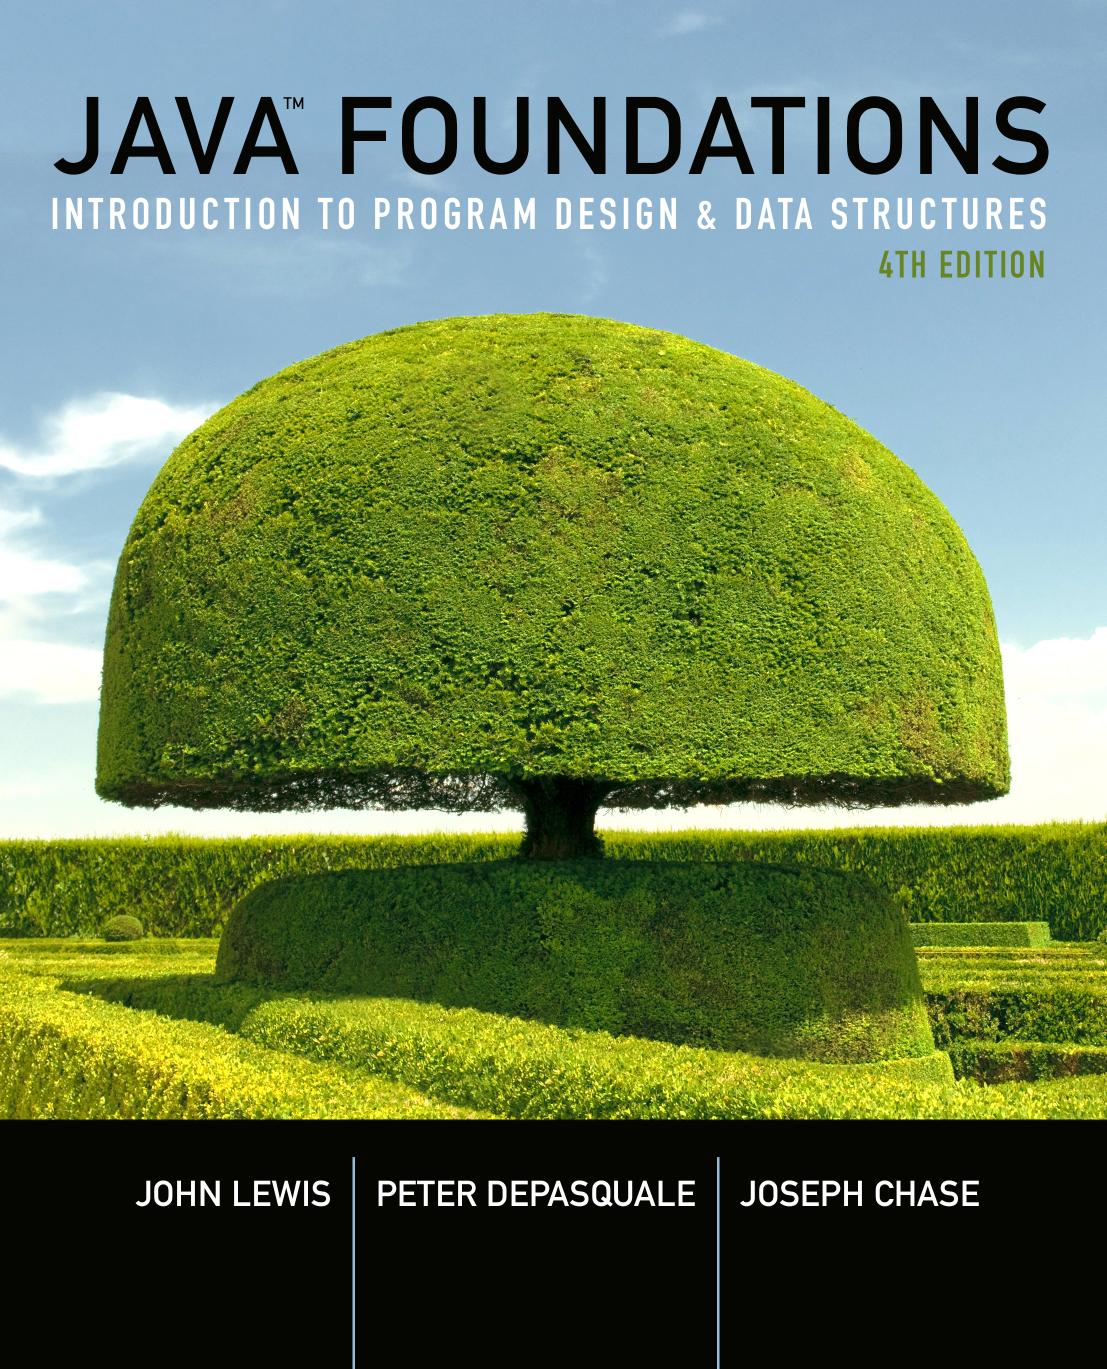 (eBook PDF)Java Foundations: Introduction to Program Design and Data Structures 4th Edition by John Lewis,Peter DePasquale,Joe Chase